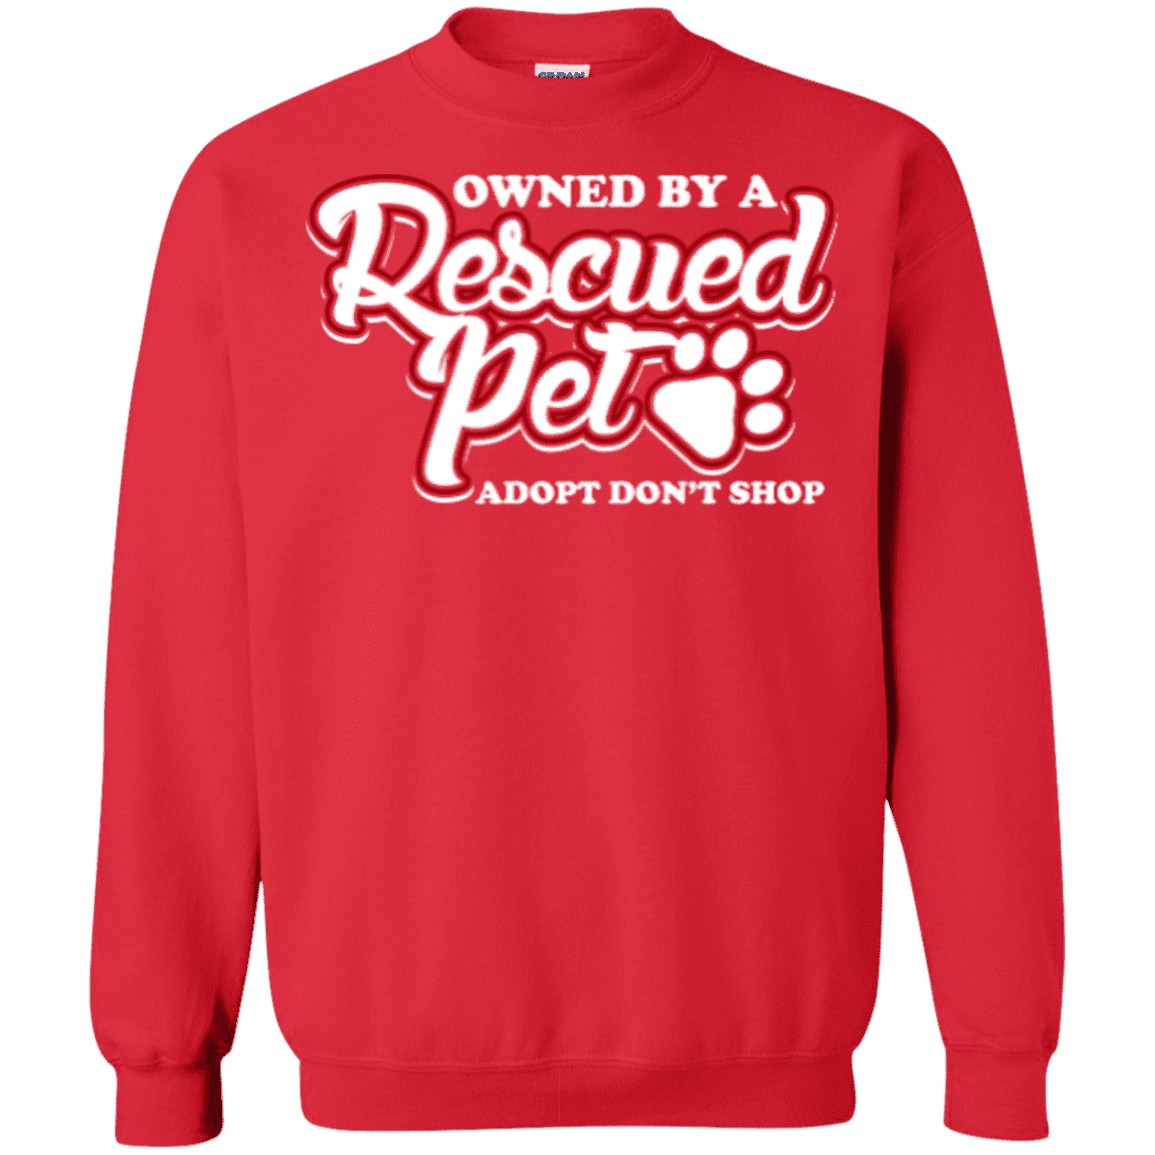 Owned By A Rescued Pet - Sweatshirt.